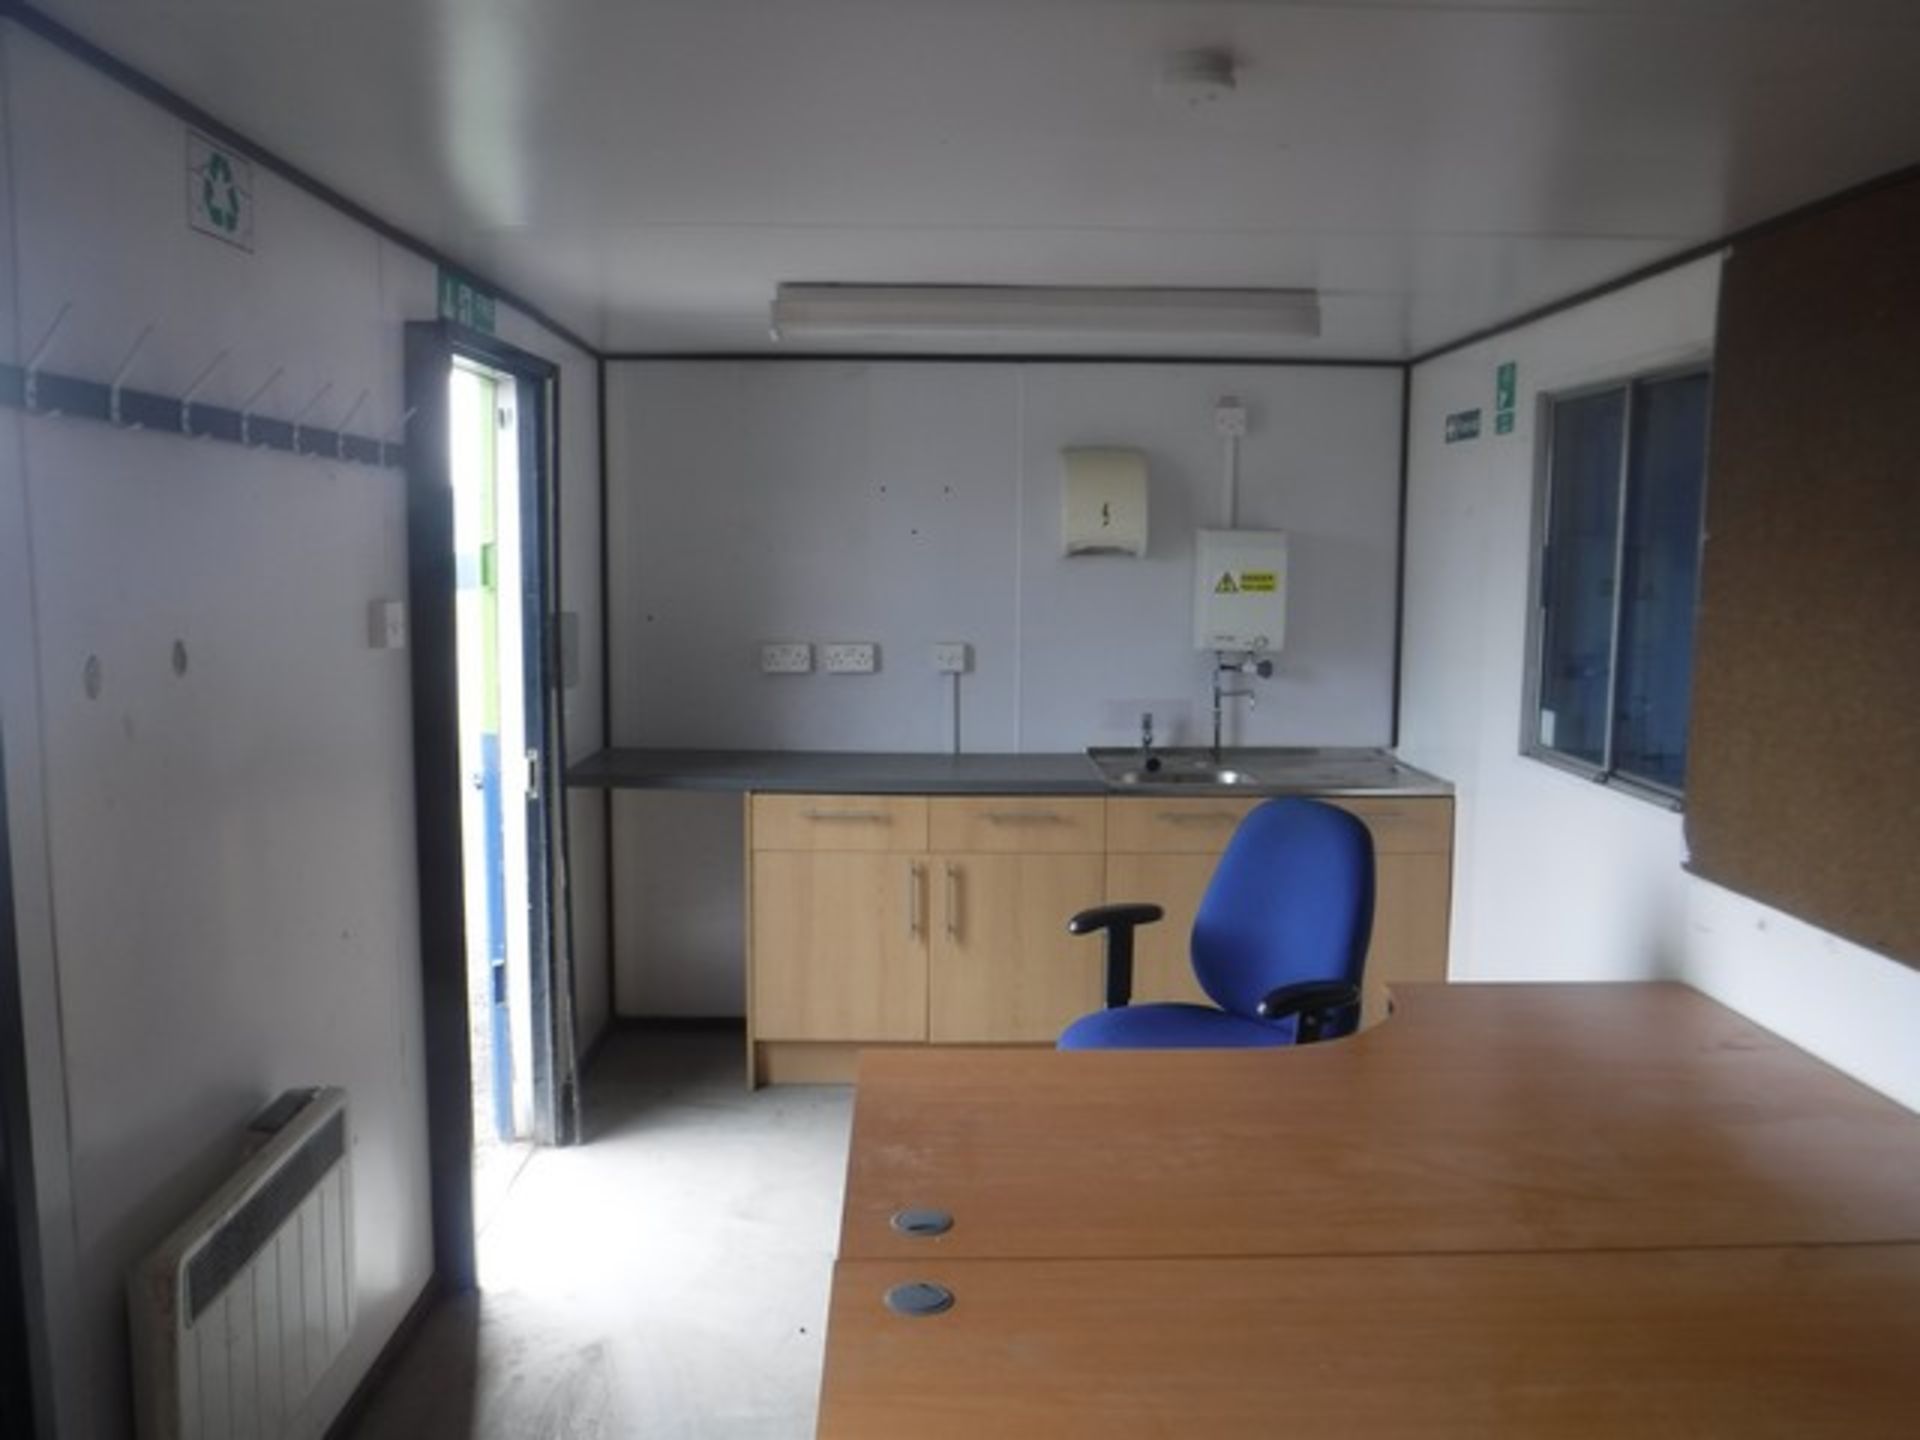 24ft OFFICE with small store & chemical toilet. Toilet door seazed. S/N PF277. No 011. - Bild 4 aus 5